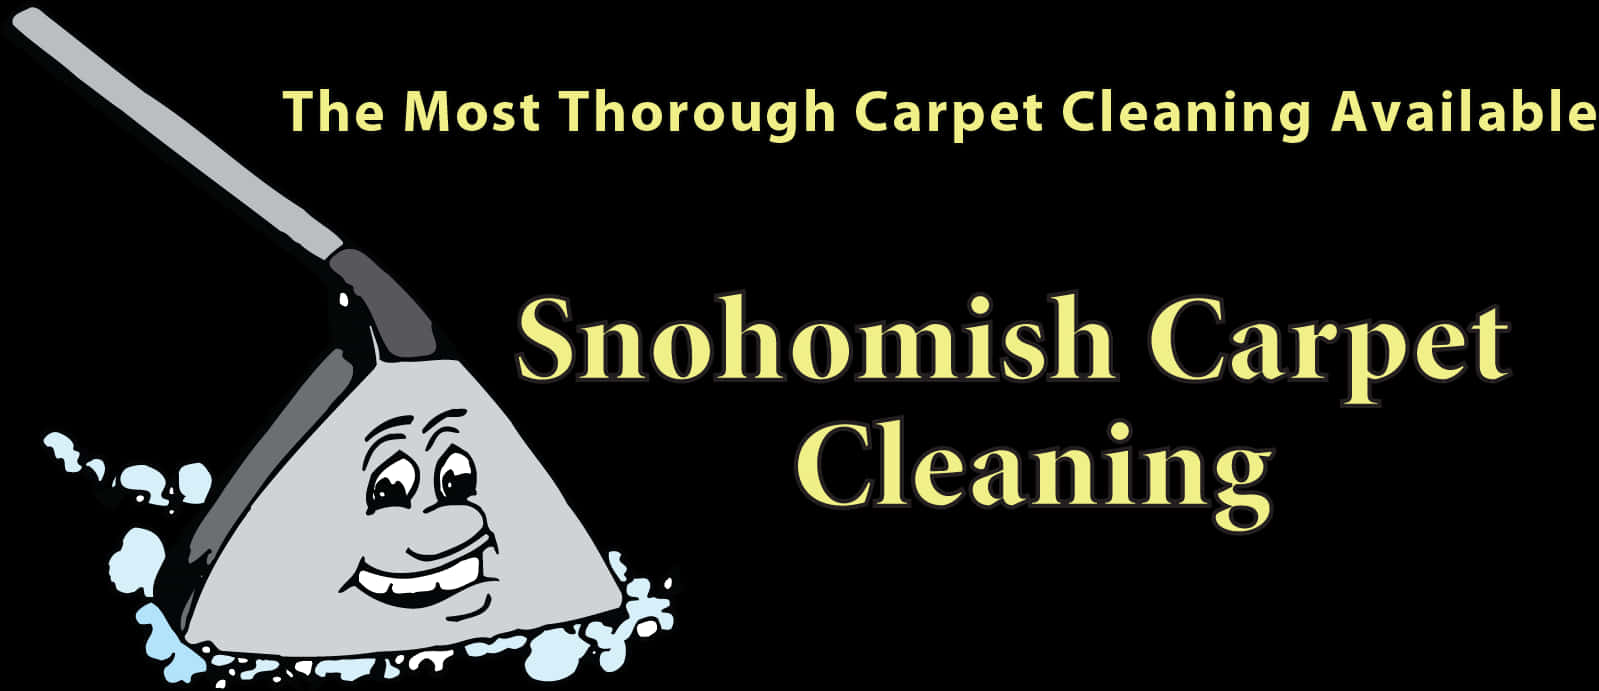 Snohomish Carpet Cleaning Advertisement PNG